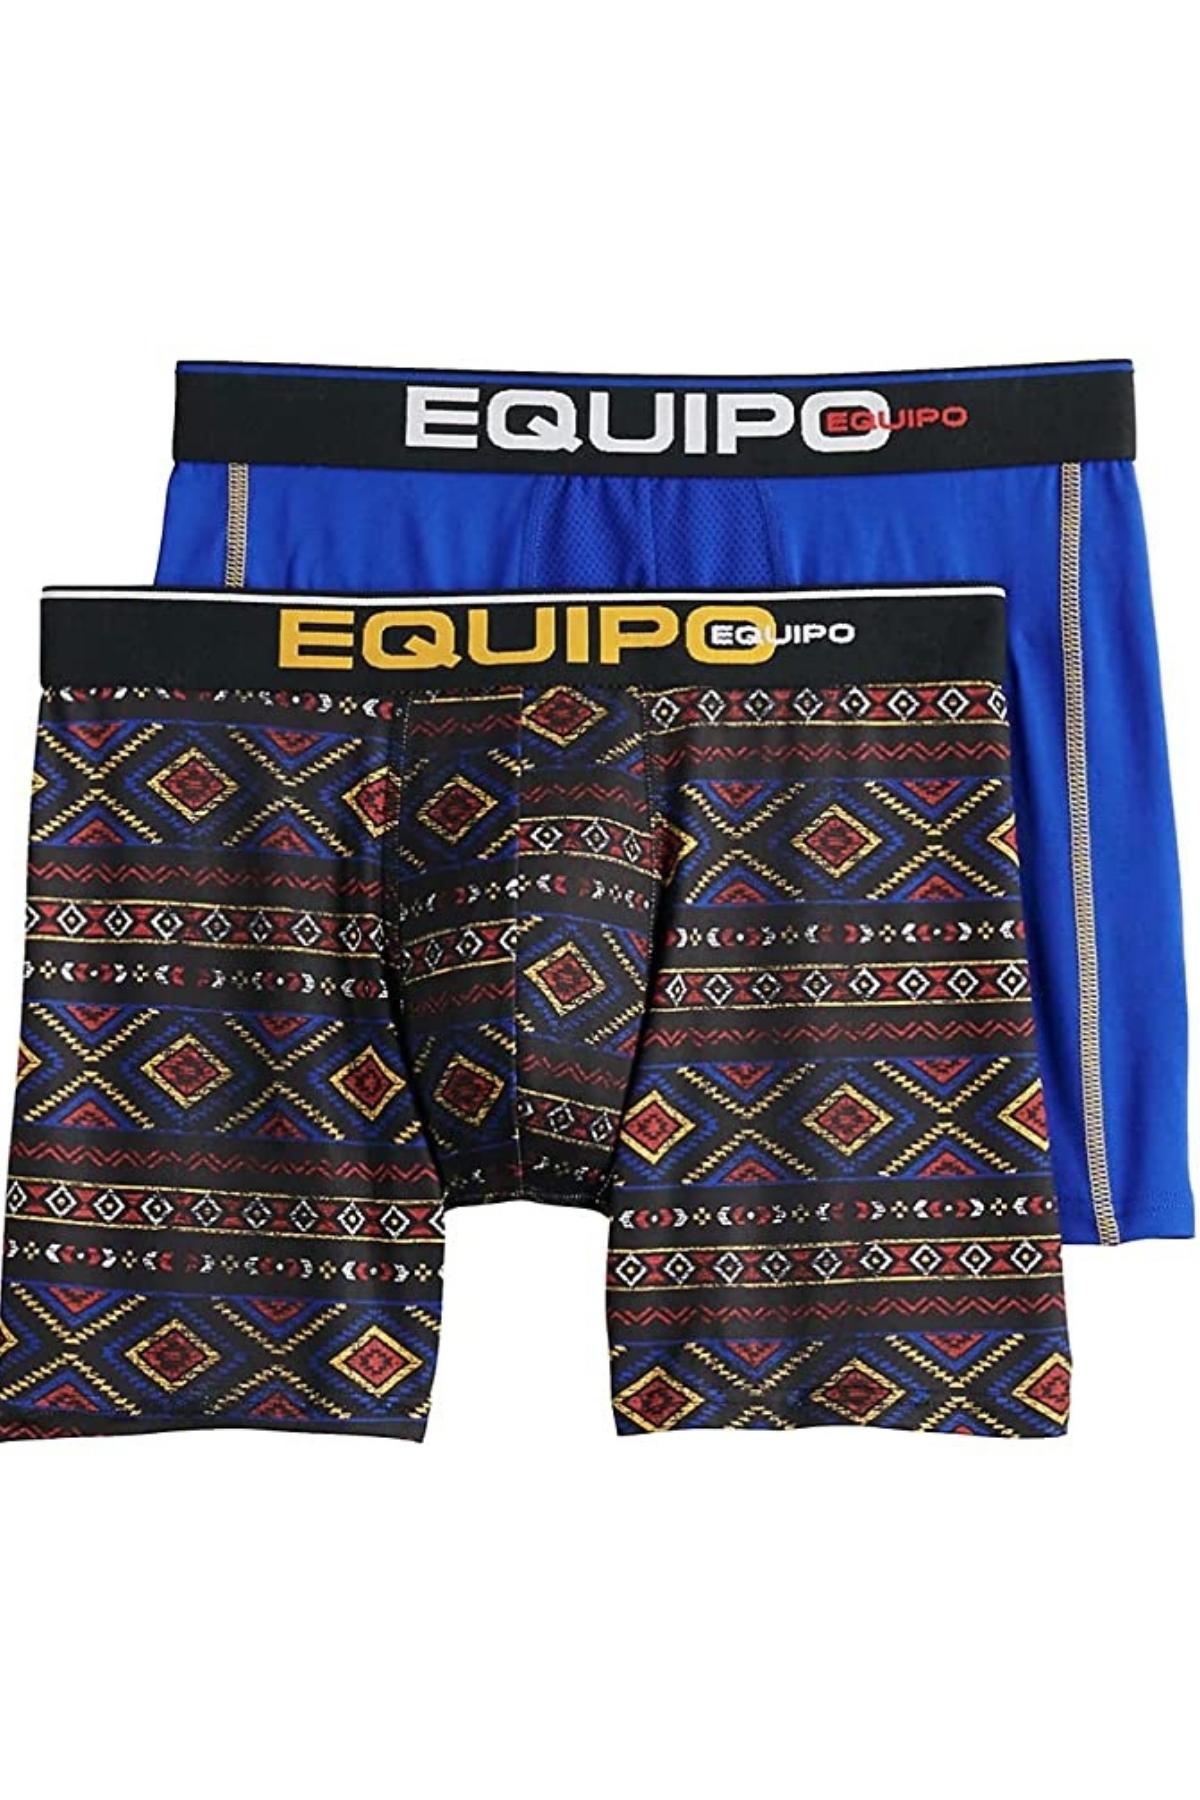 Equipo Blue and Tribal Quick Dry Performace 2-Pack Boxer Briefs